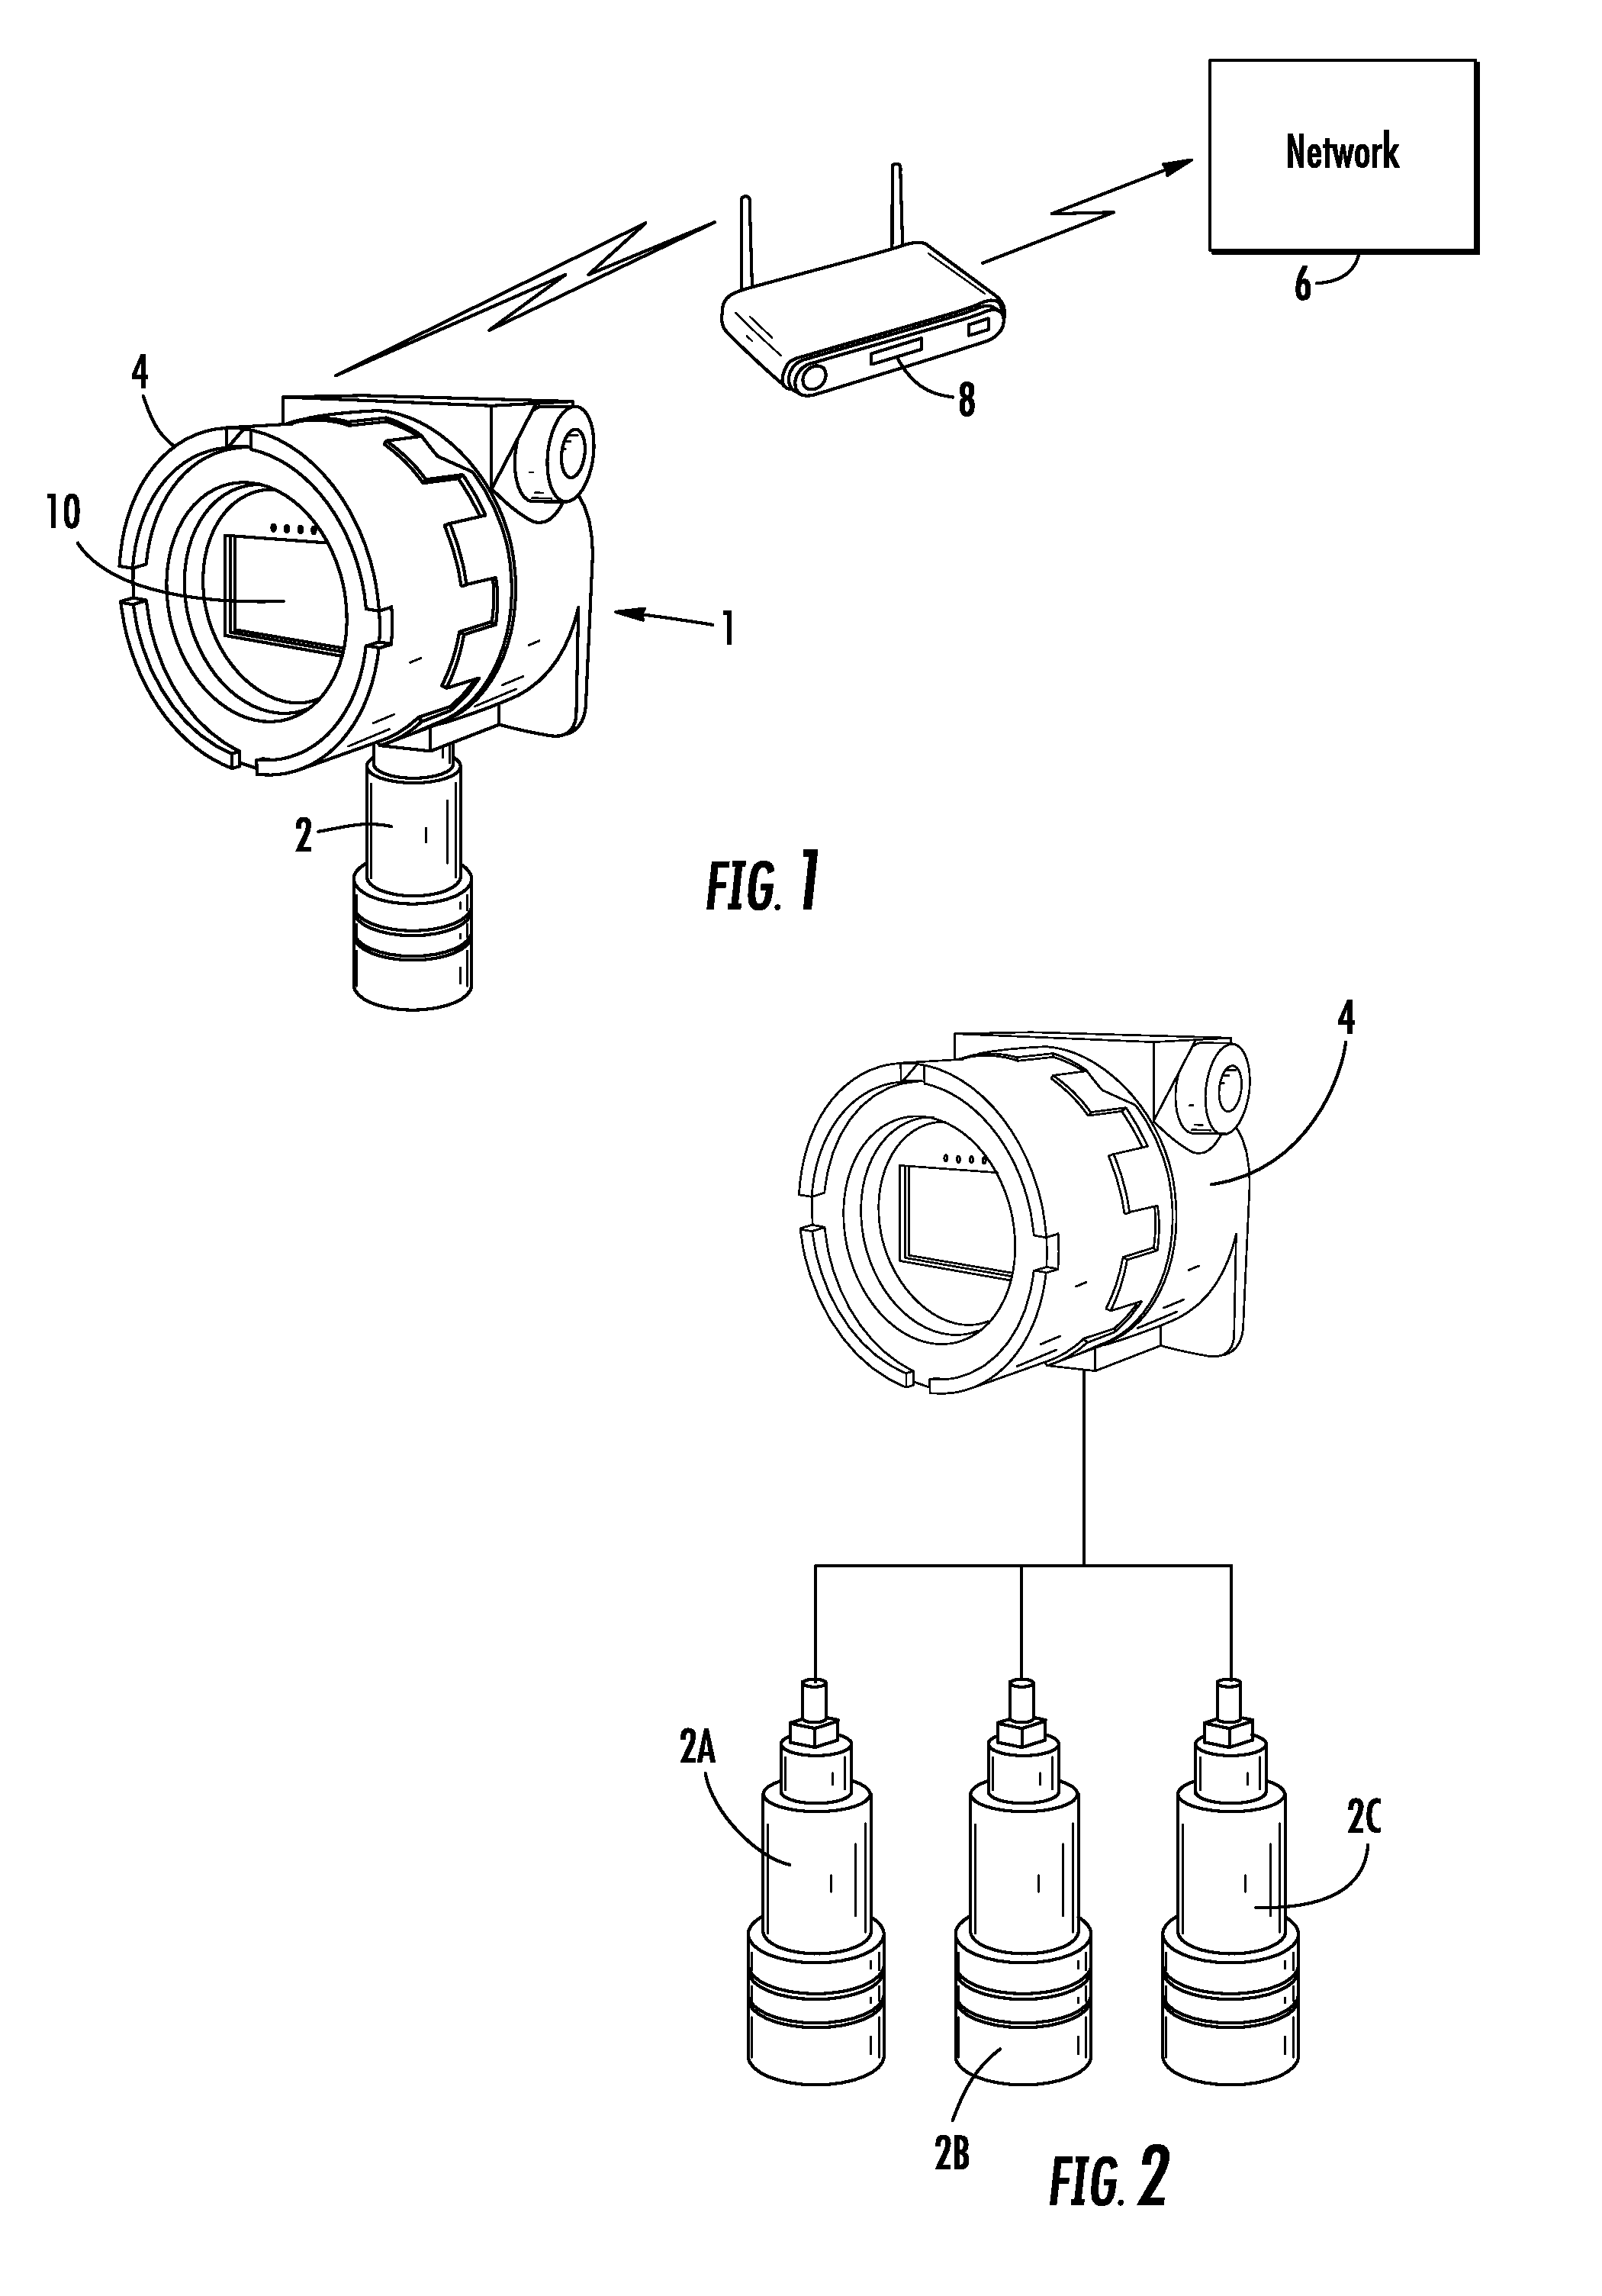 System and method for automatically adjusting gas sensor settings and parameters